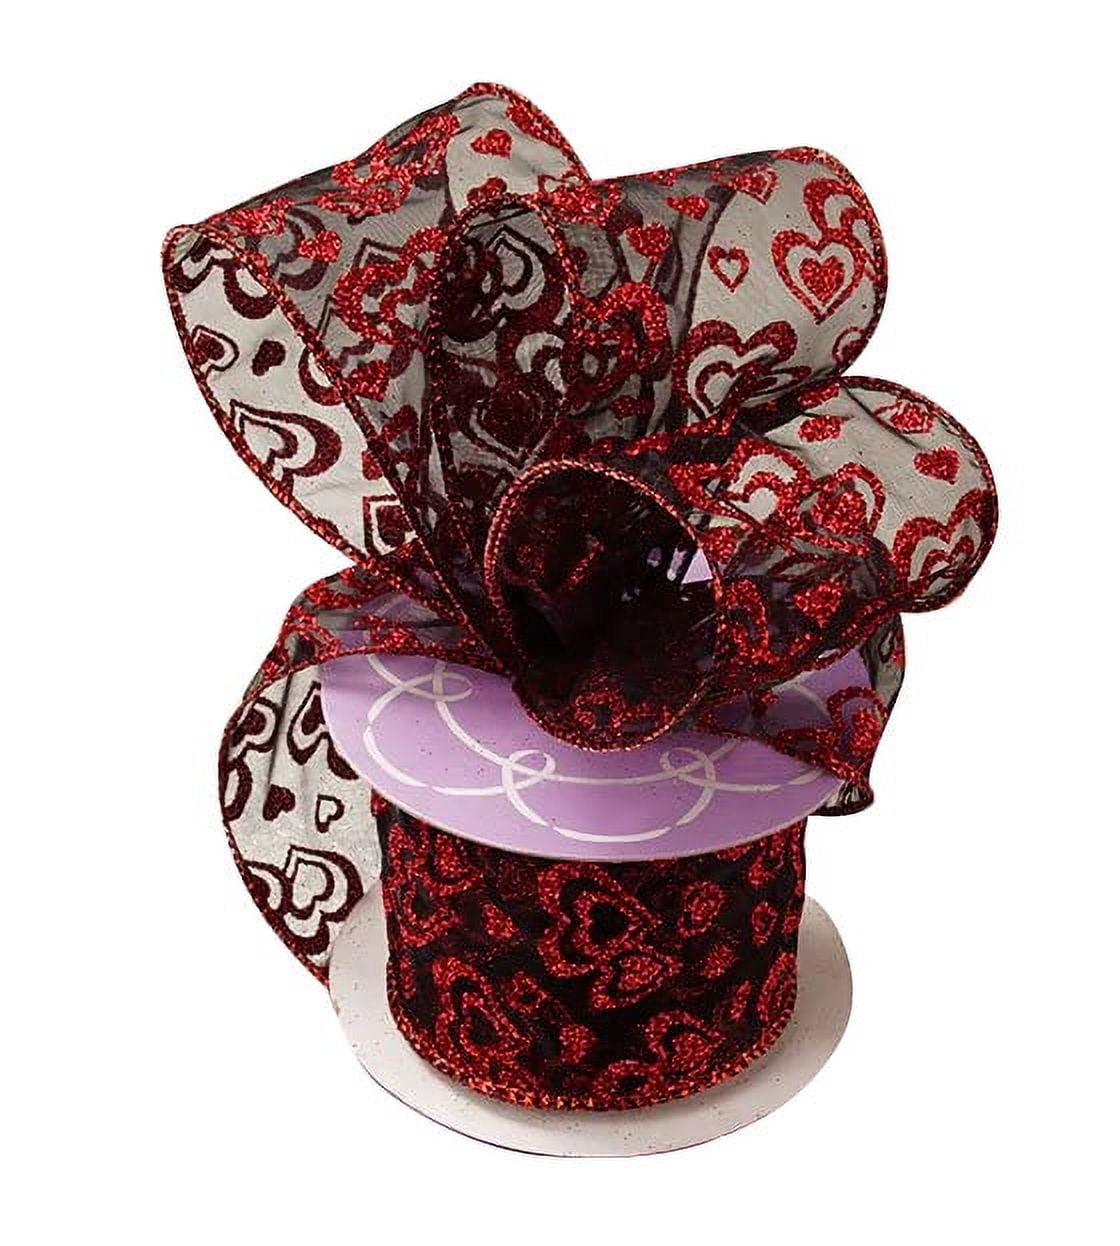 Glitter Hearts 1 1/2 In. x 20 Yds. Valentines Day Ribbon